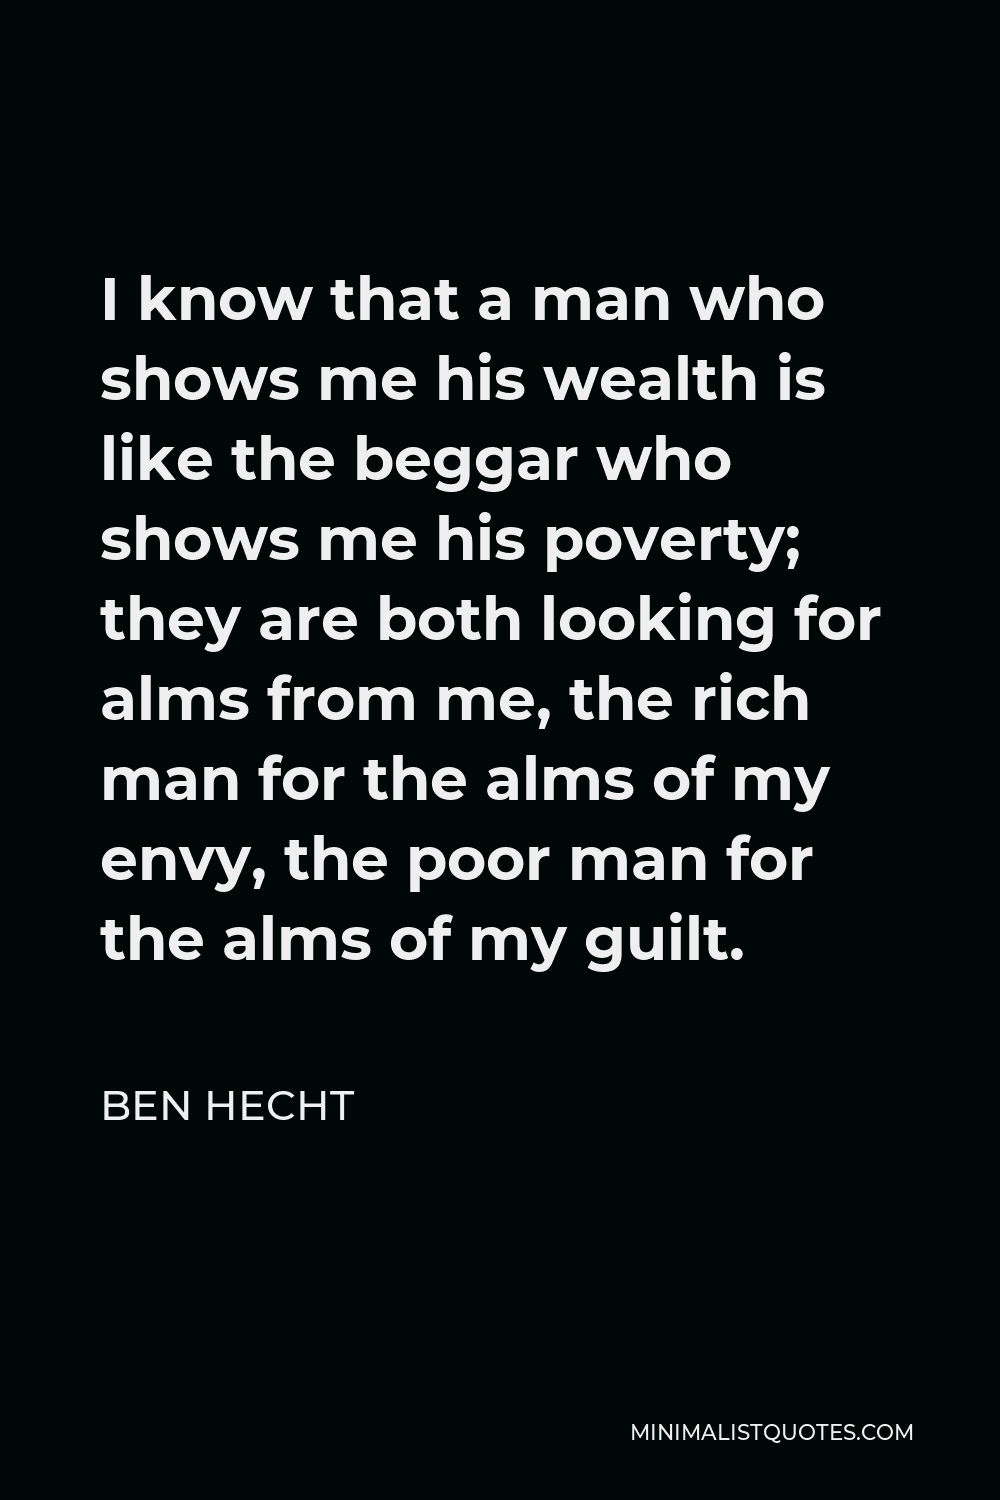 Ben Hecht Quote - I know that a man who shows me his wealth is like the beggar who shows me his poverty; they are both looking for alms from me, the rich man for the alms of my envy, the poor man for the alms of my guilt.